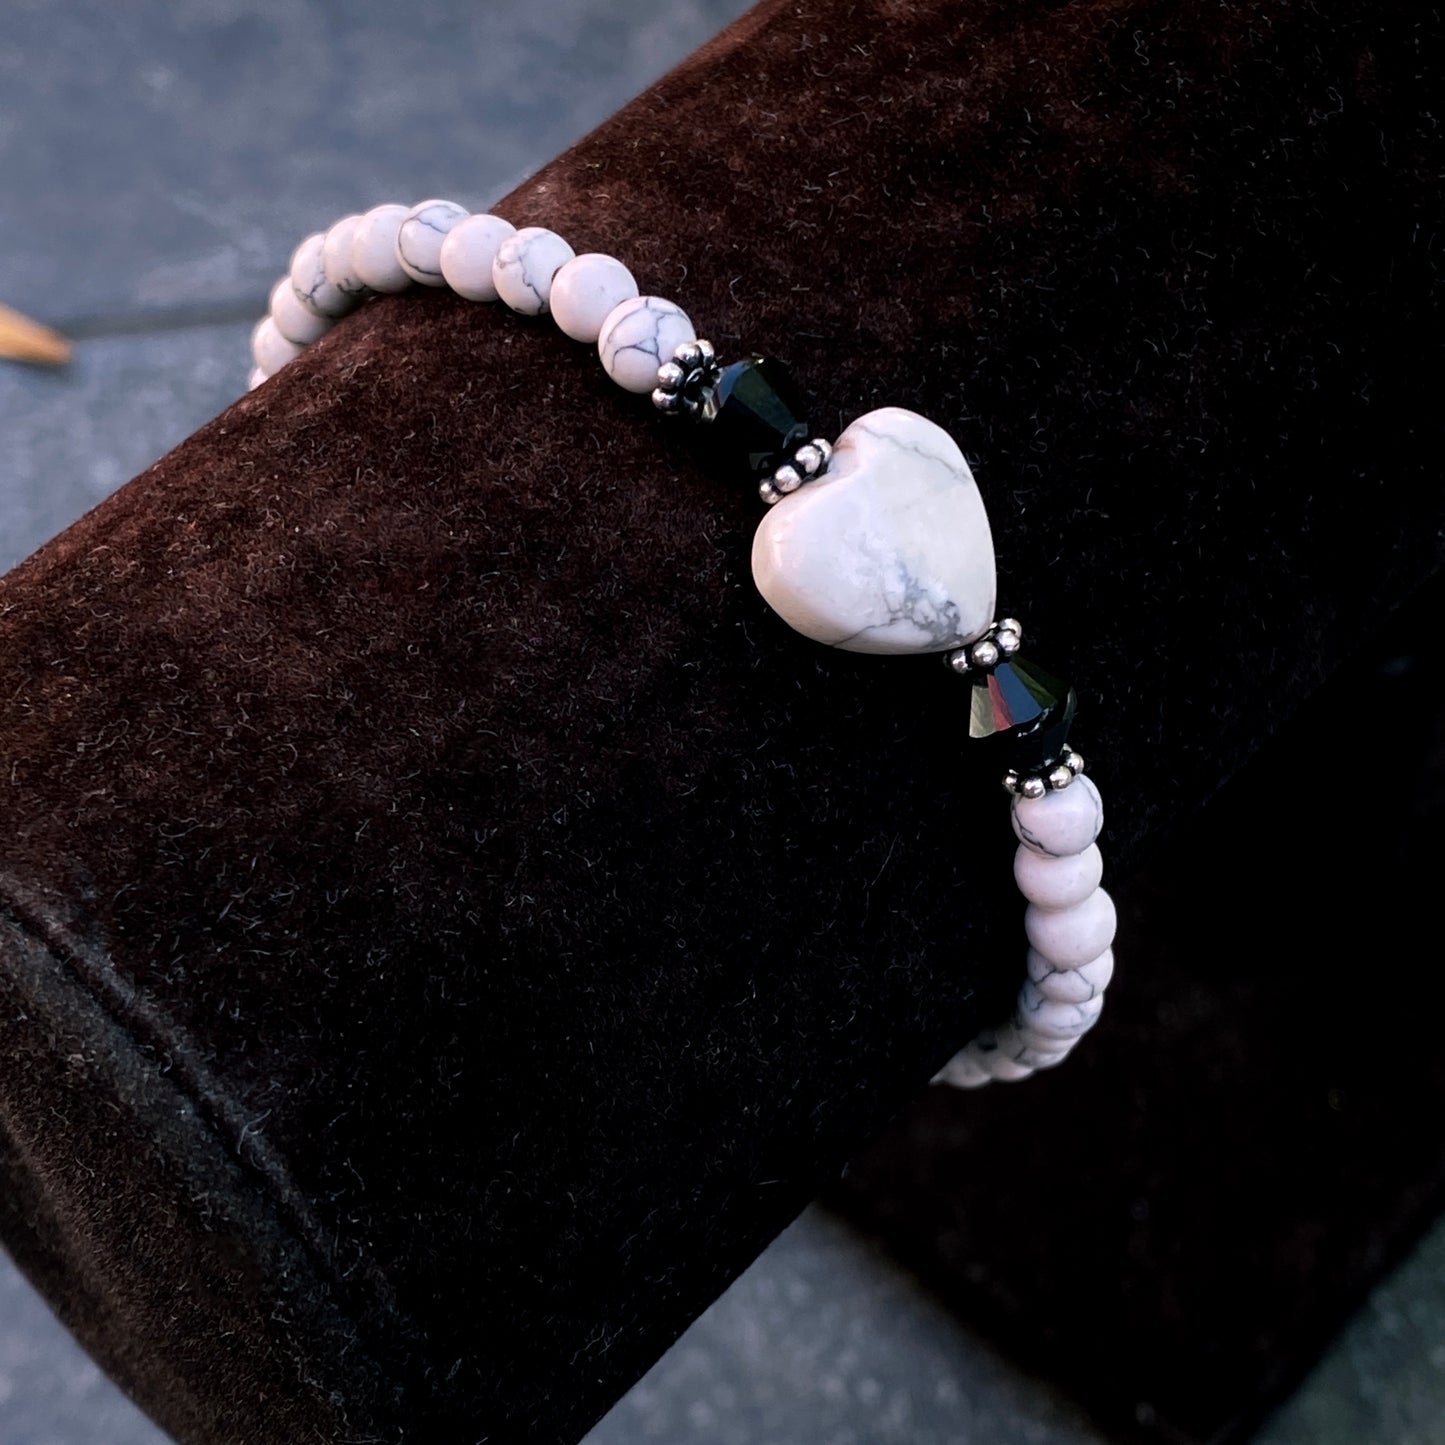 White Turquoise gemstone Bracelet with Onyx and Sterling Silver